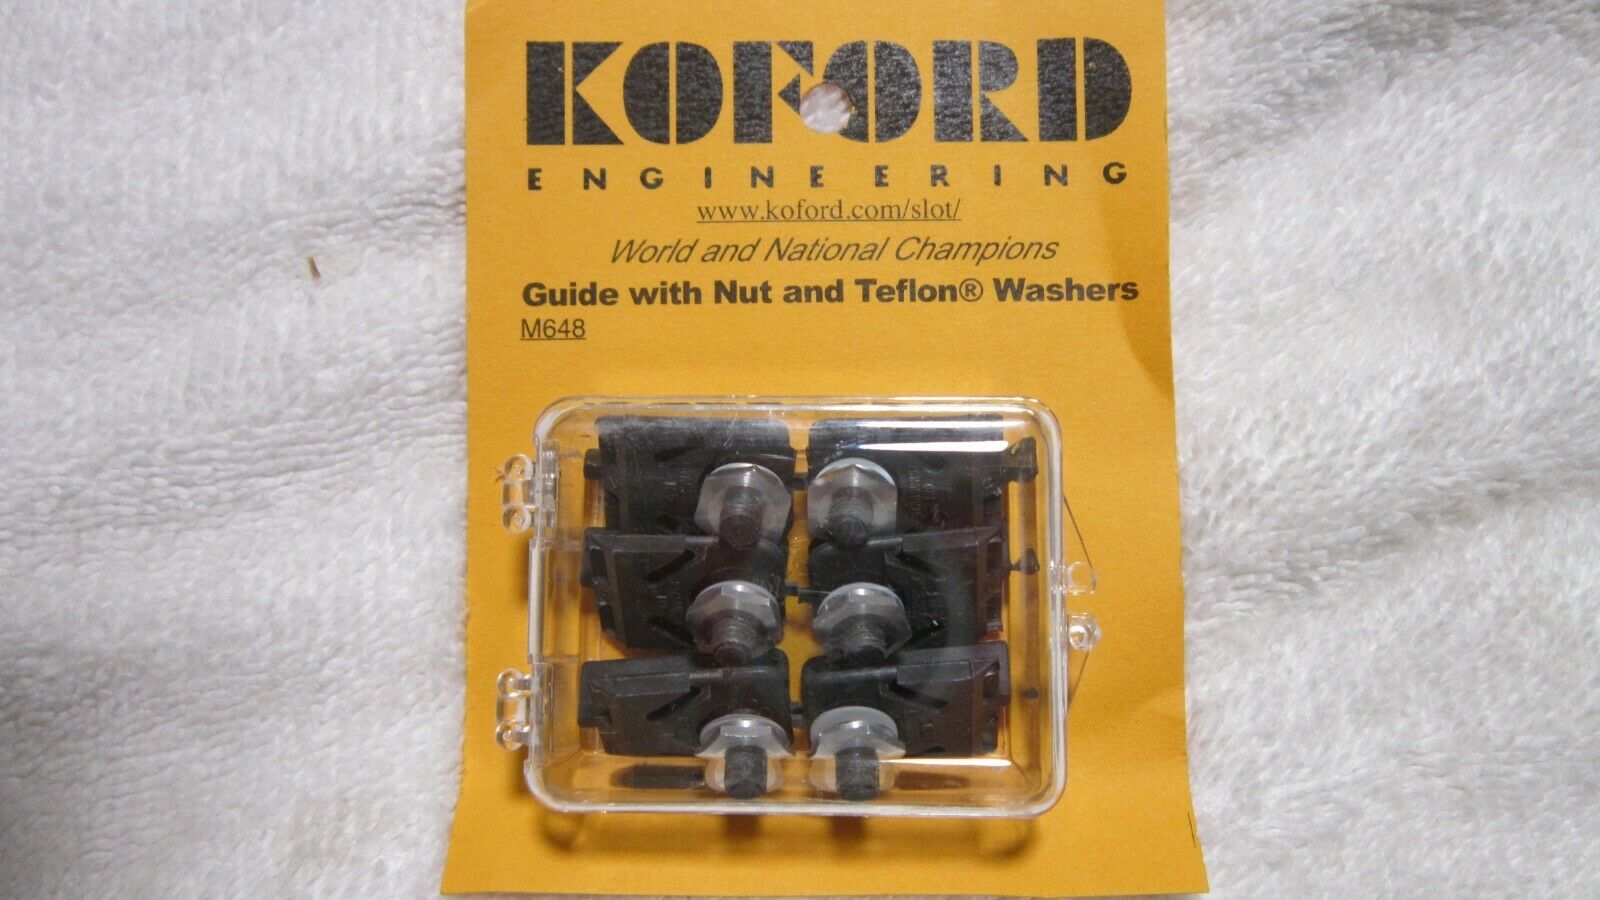 Koford Engineering Guide With Nut And Teflon Washers